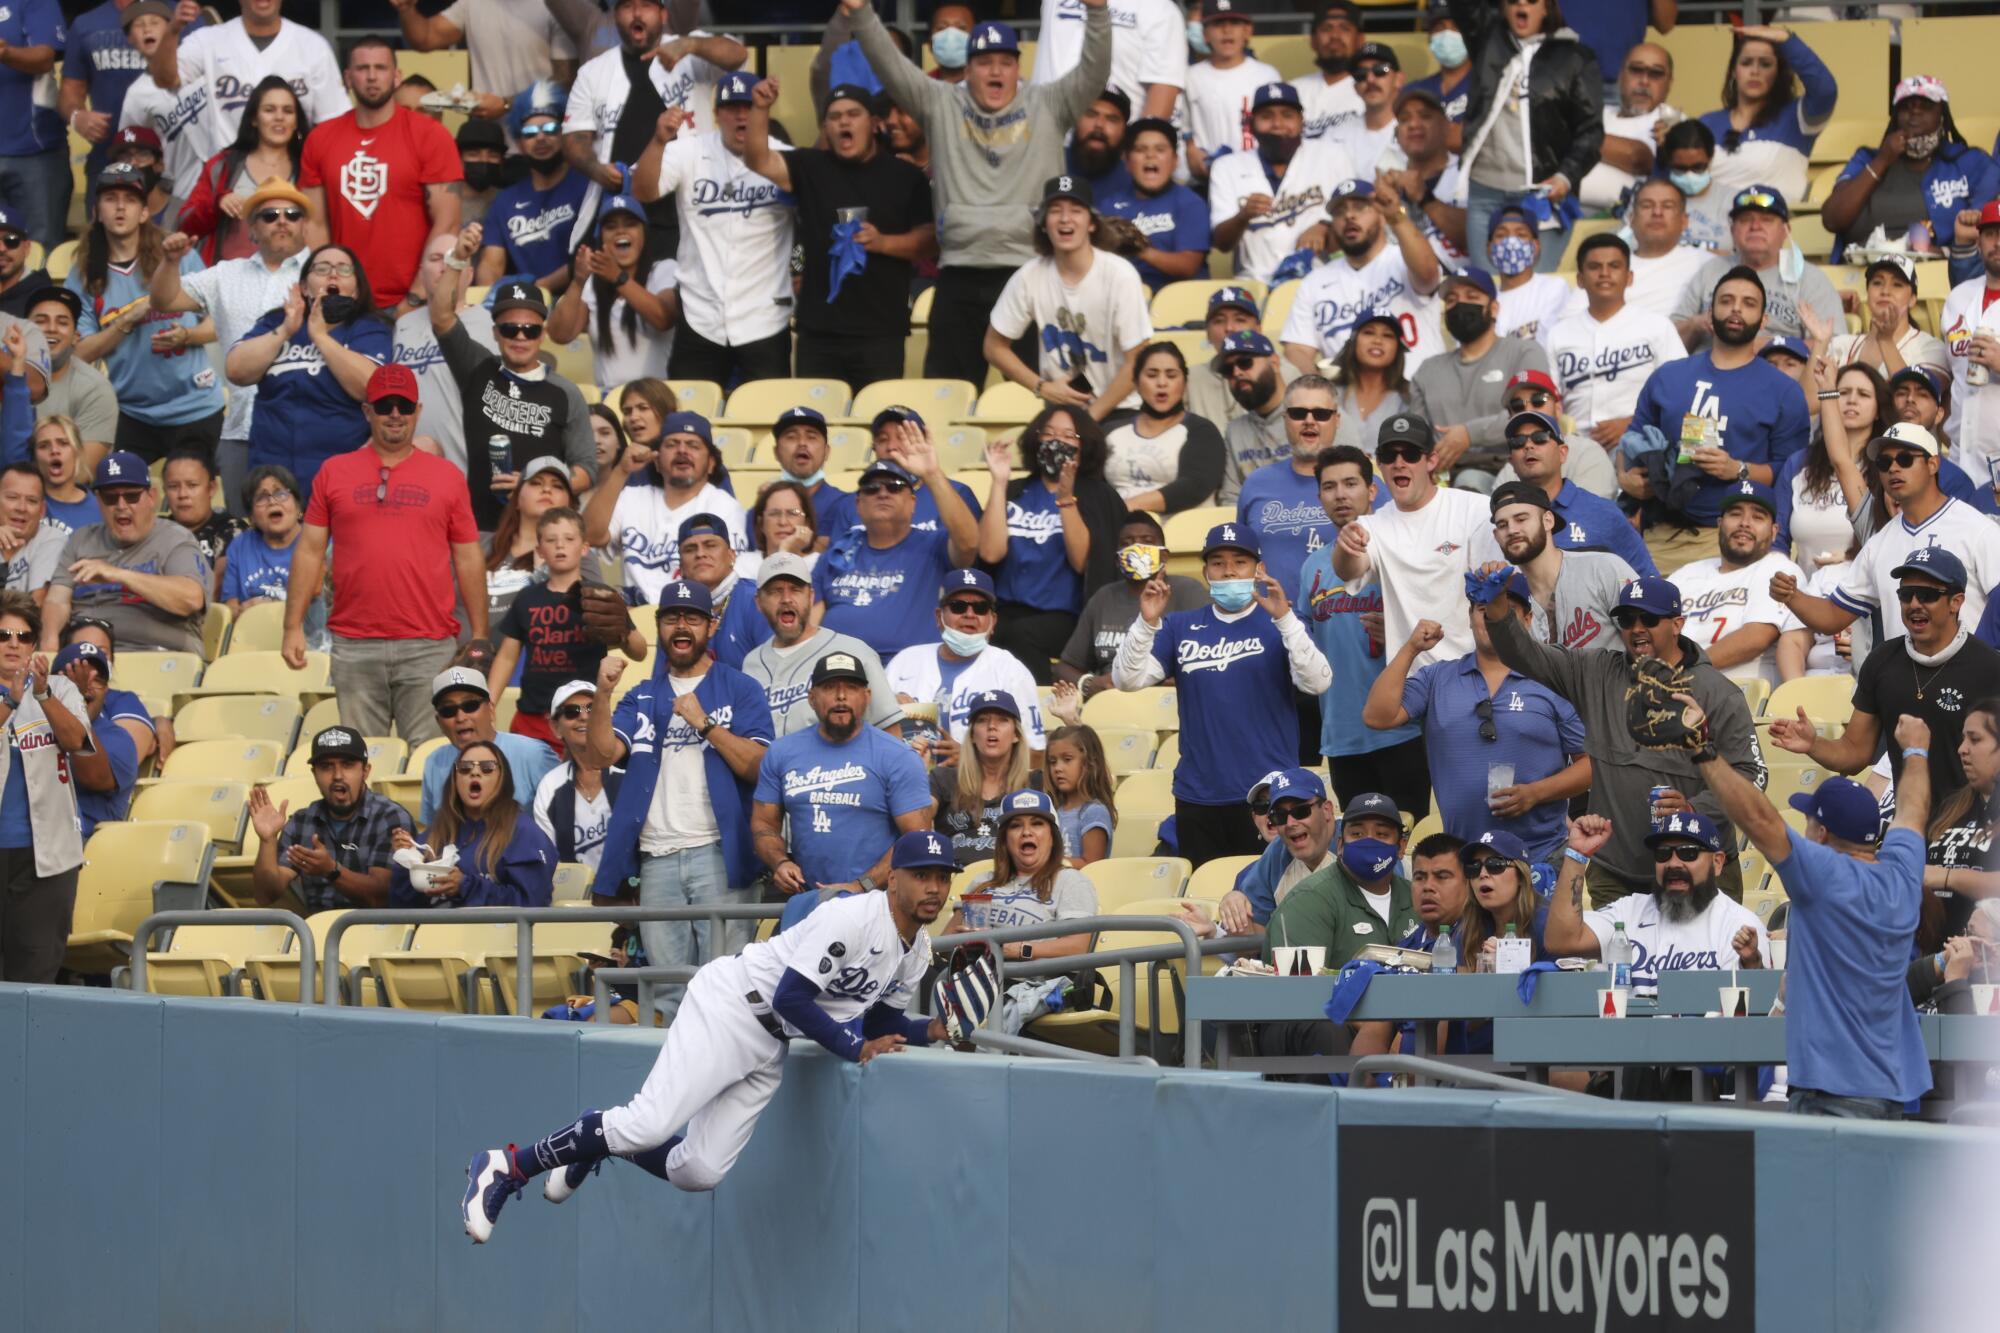 The crowd cheers after Los Angeles Dodgers right fielder Mookie Betts makes a catch at the right field wall